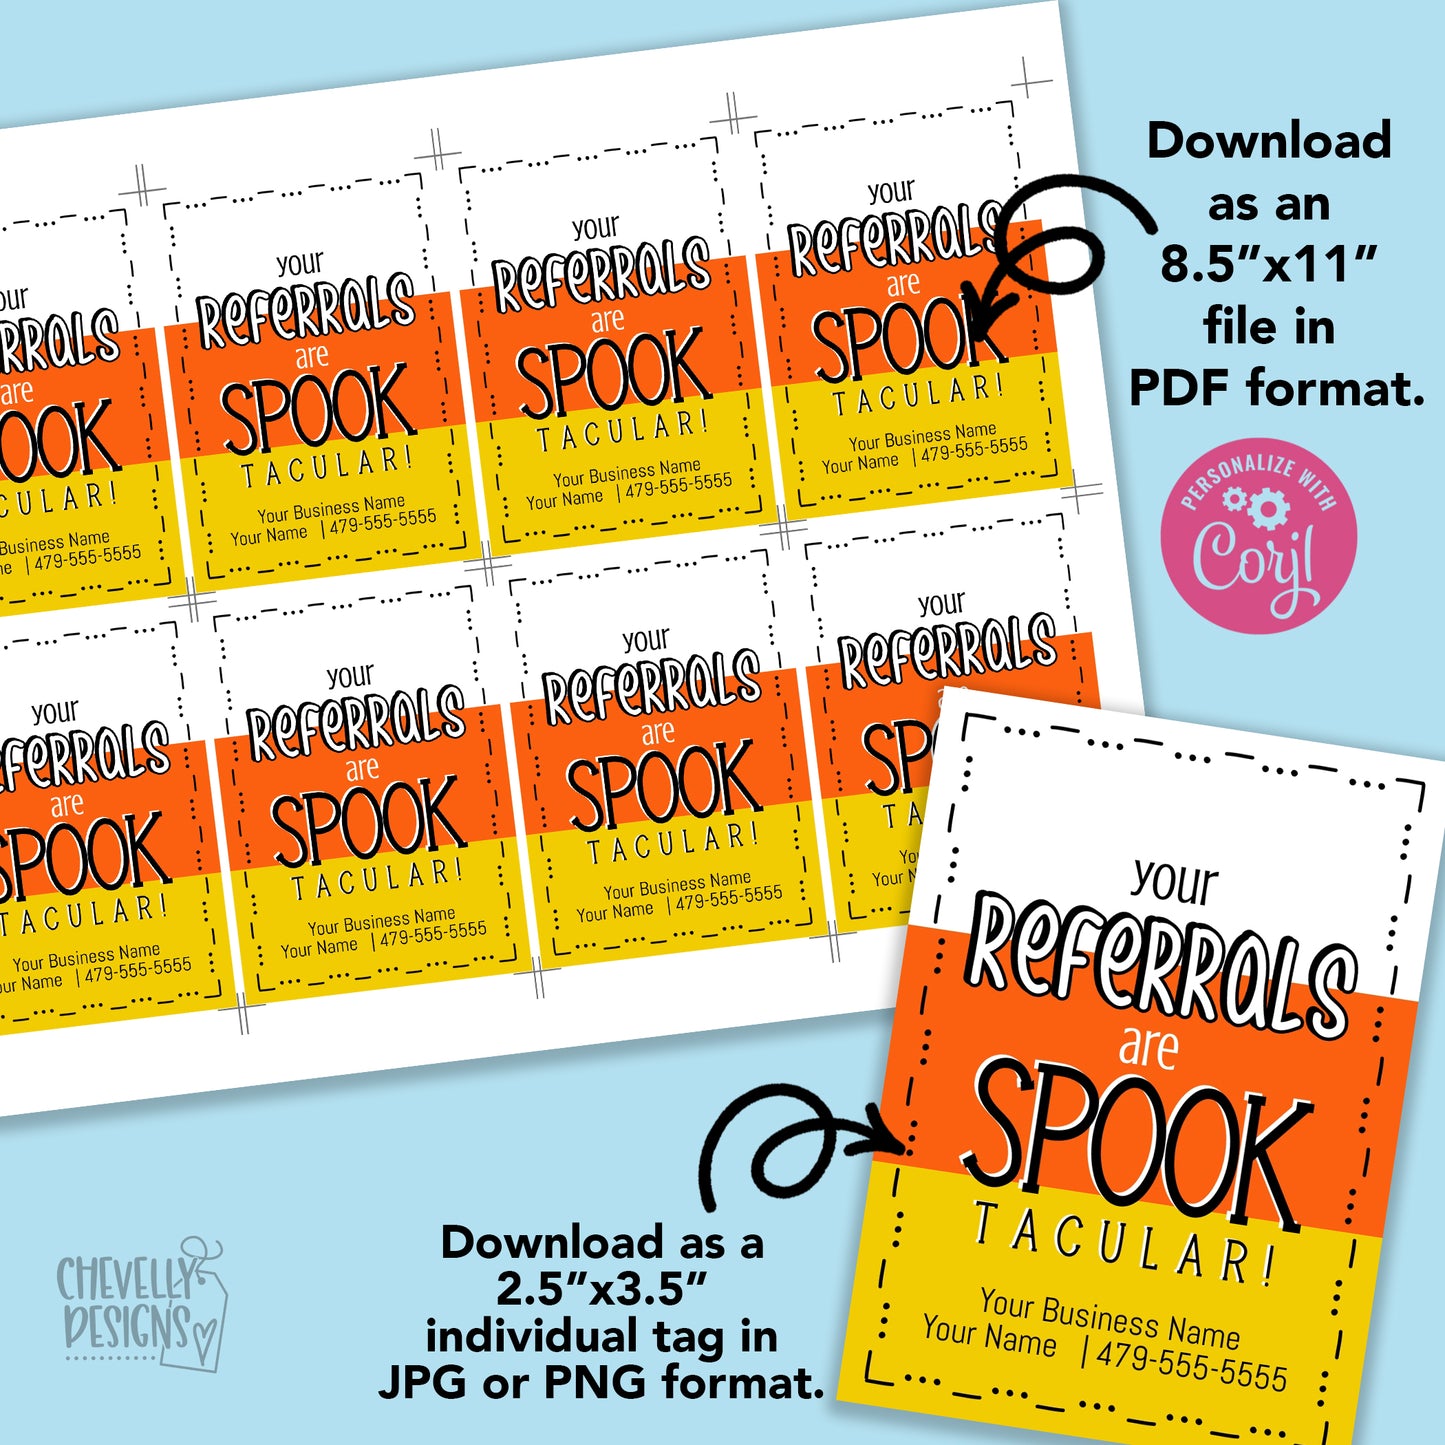 EDITABLE - Your Referrals are Spook-tacular - Candy Corn Gift Tags - Printable Digital File